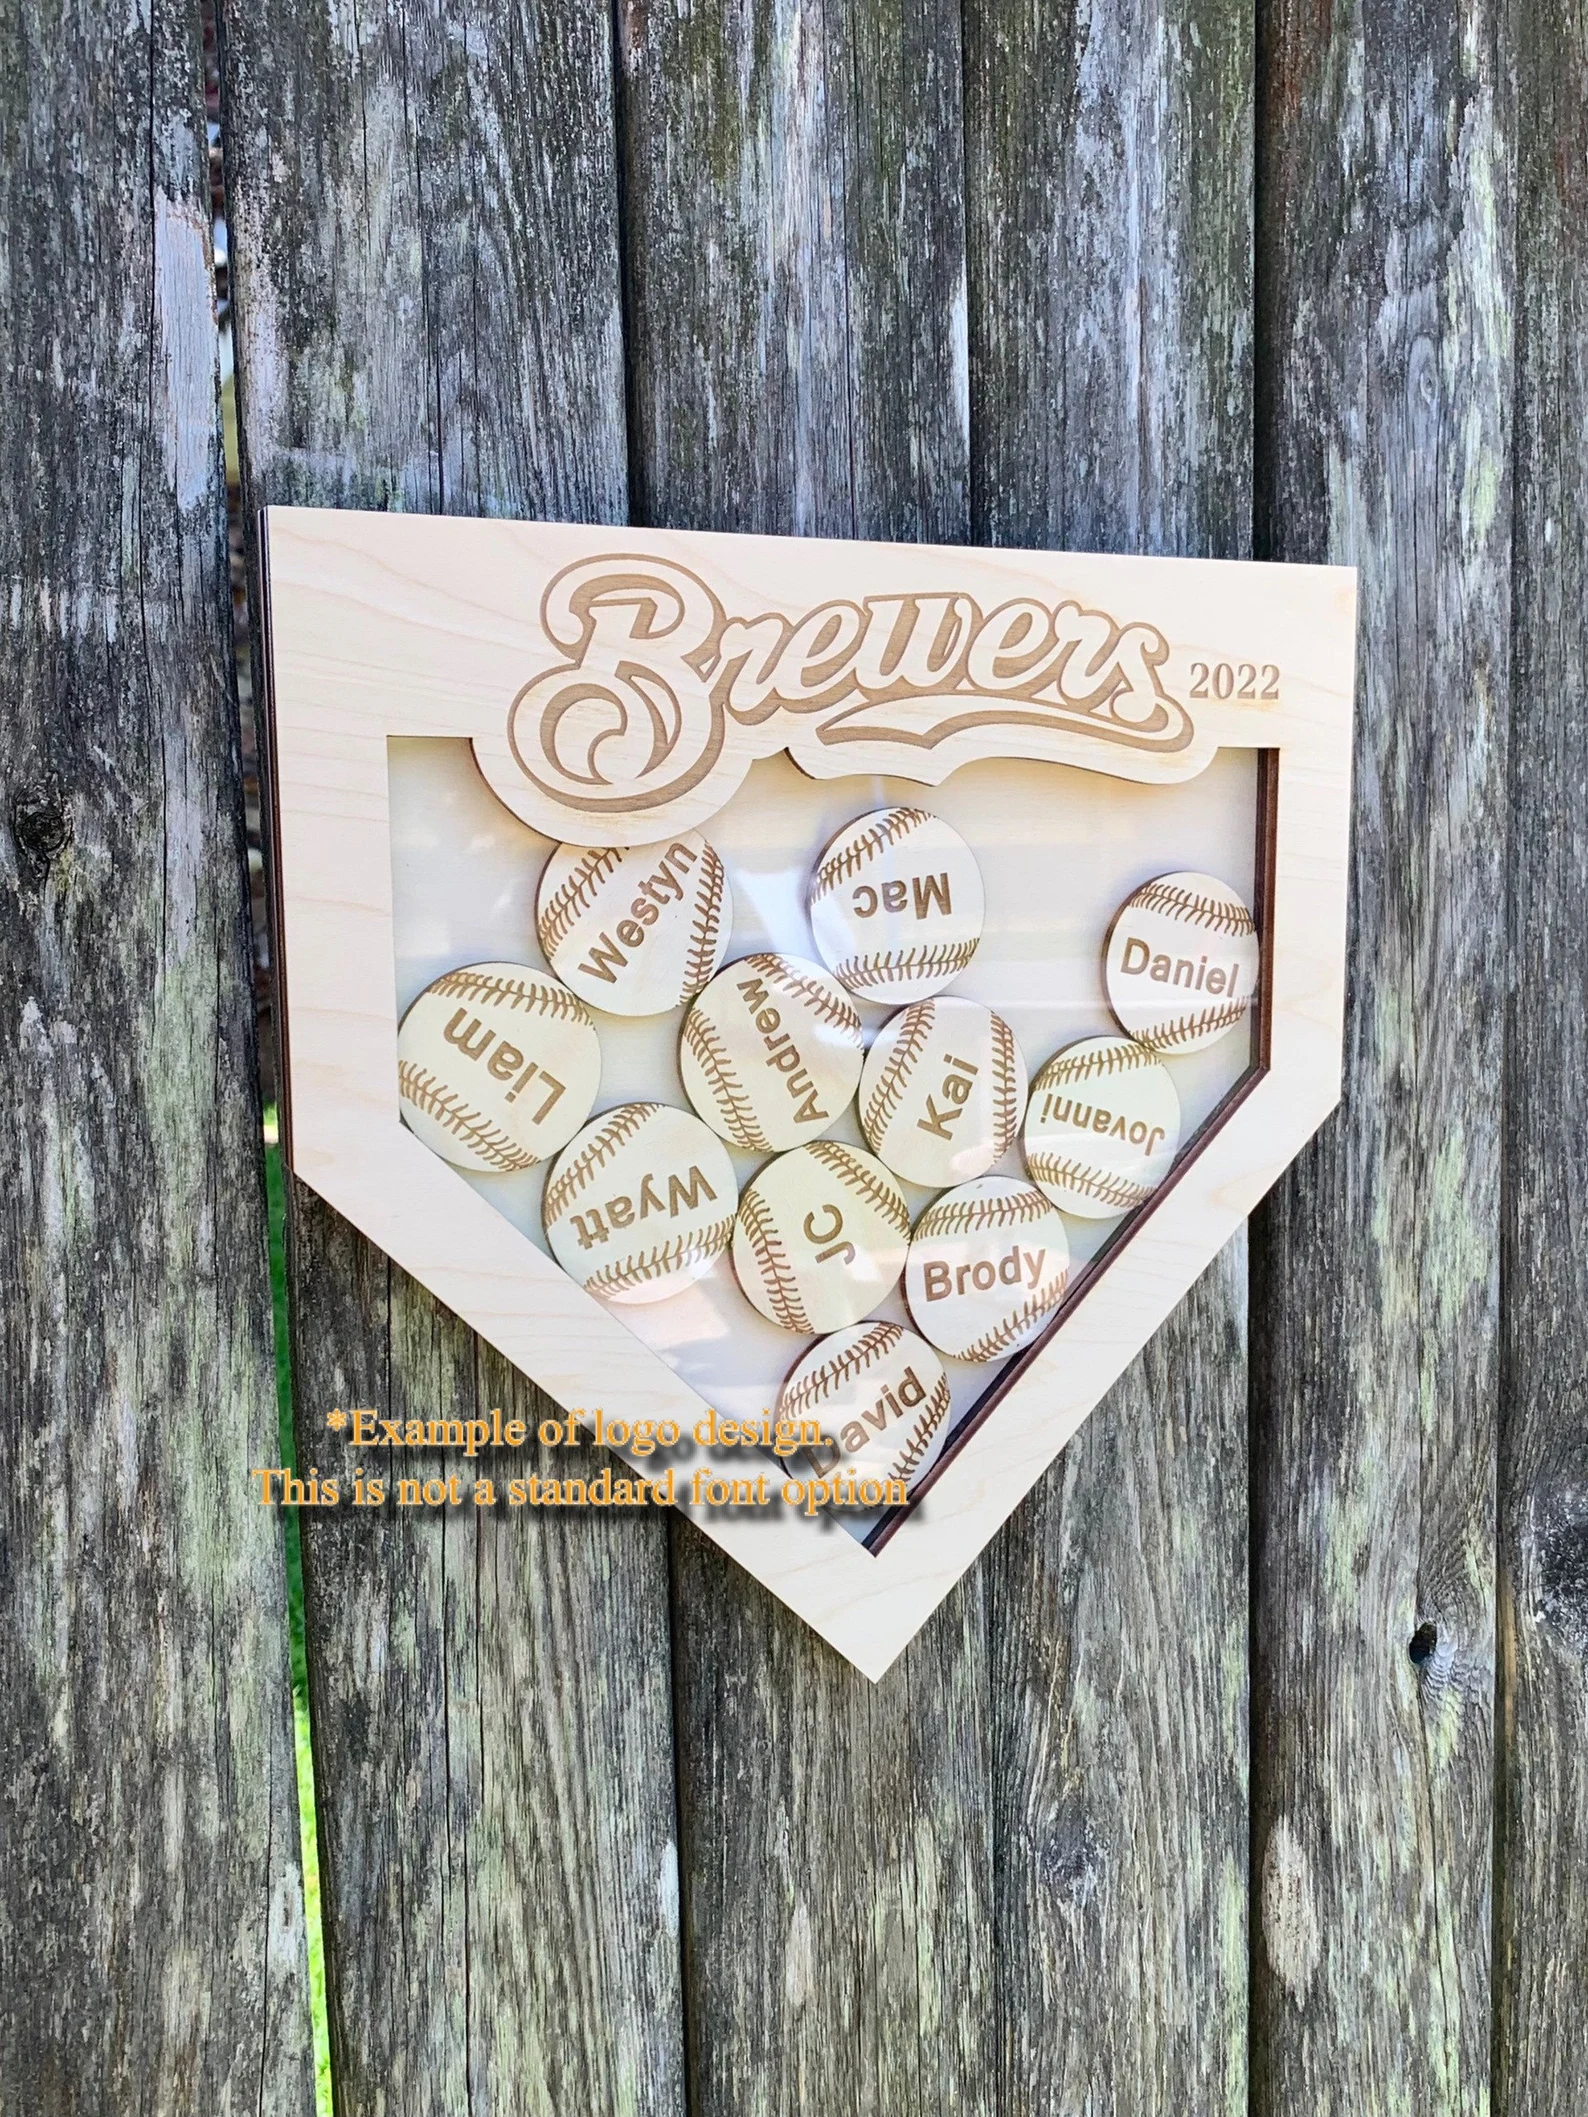 Senior Night is also a great time to show appreciation for your coach with a baseball gift like this keepsake from WorkbenchCustoms from Etsy.